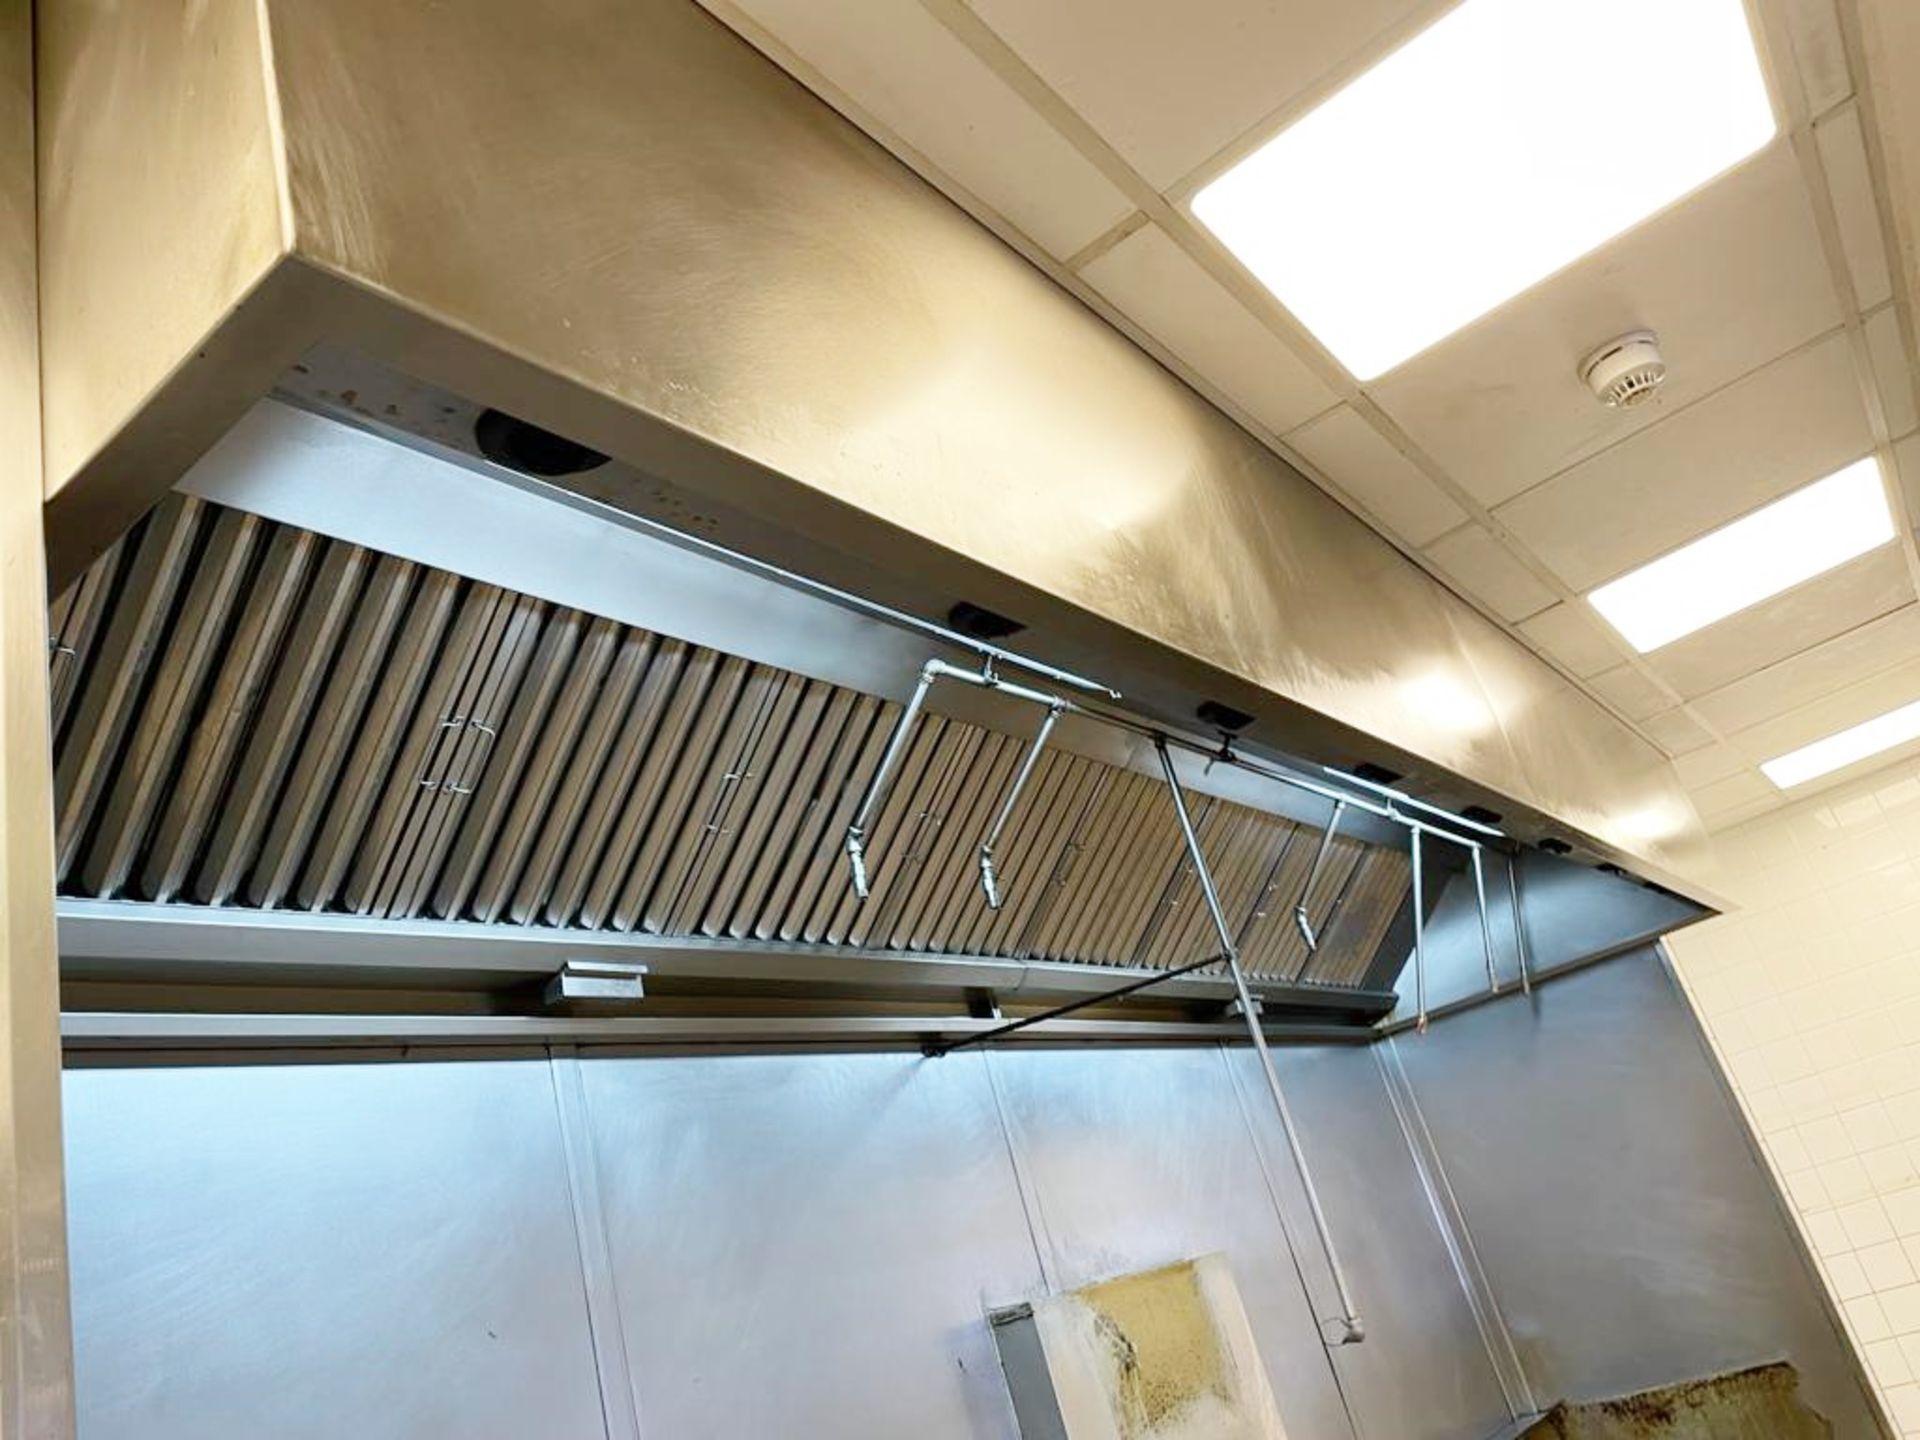 1 x Large Commercial Kitchen Extractor Canopy With Filters and Fire Suppression Fixtures - Stainless